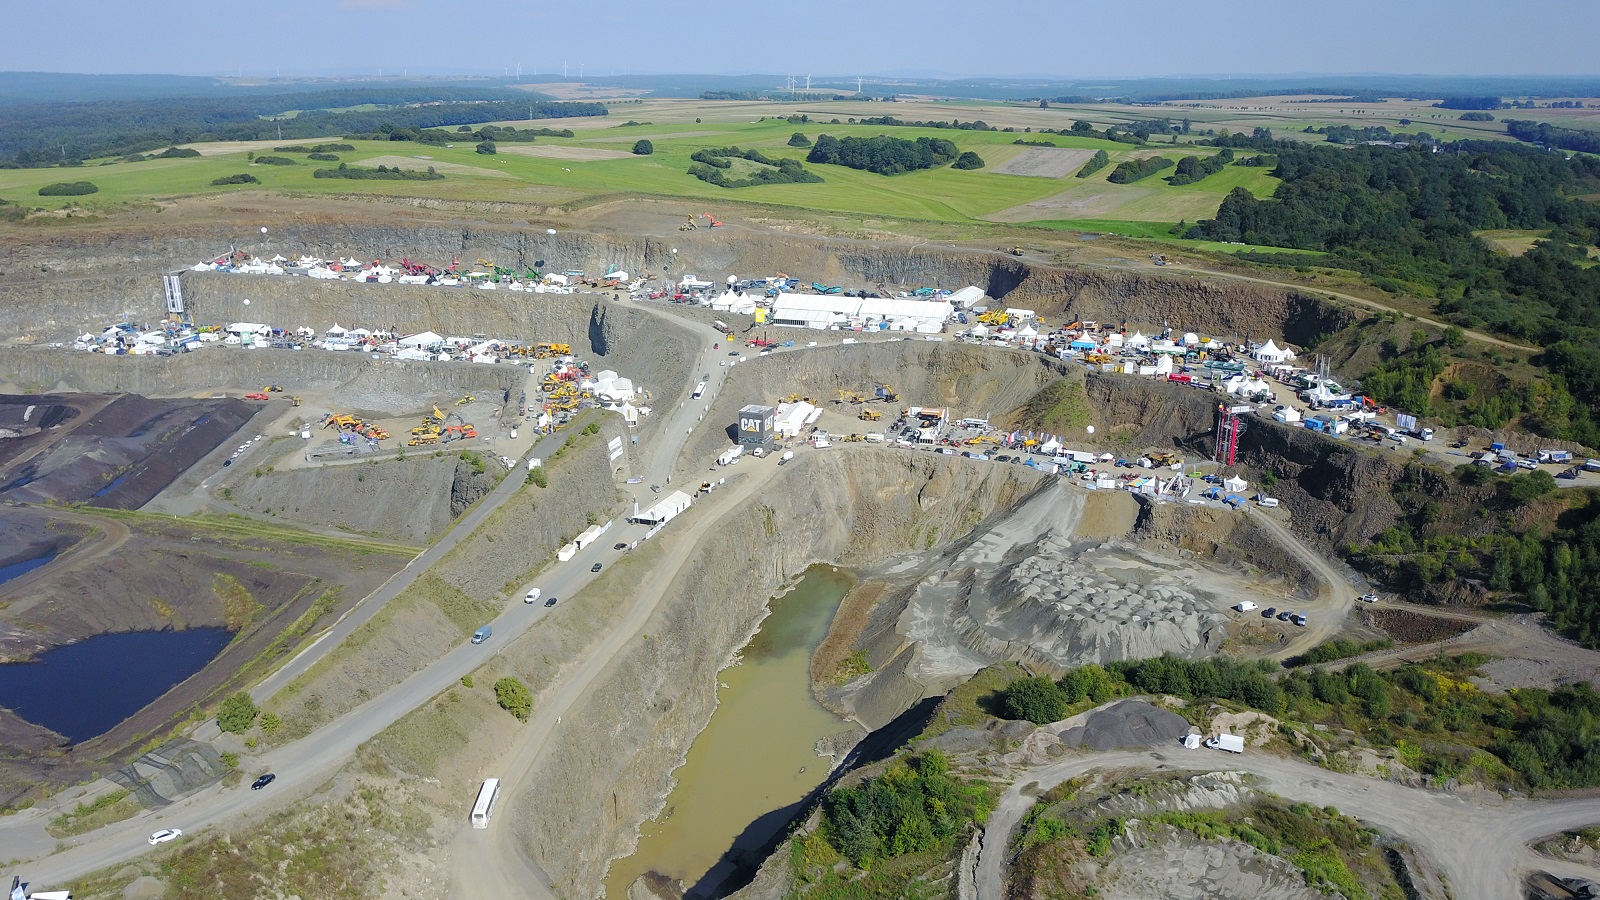  The 2023 event will again take place at the giant Nieder-Ofleiden quarry site